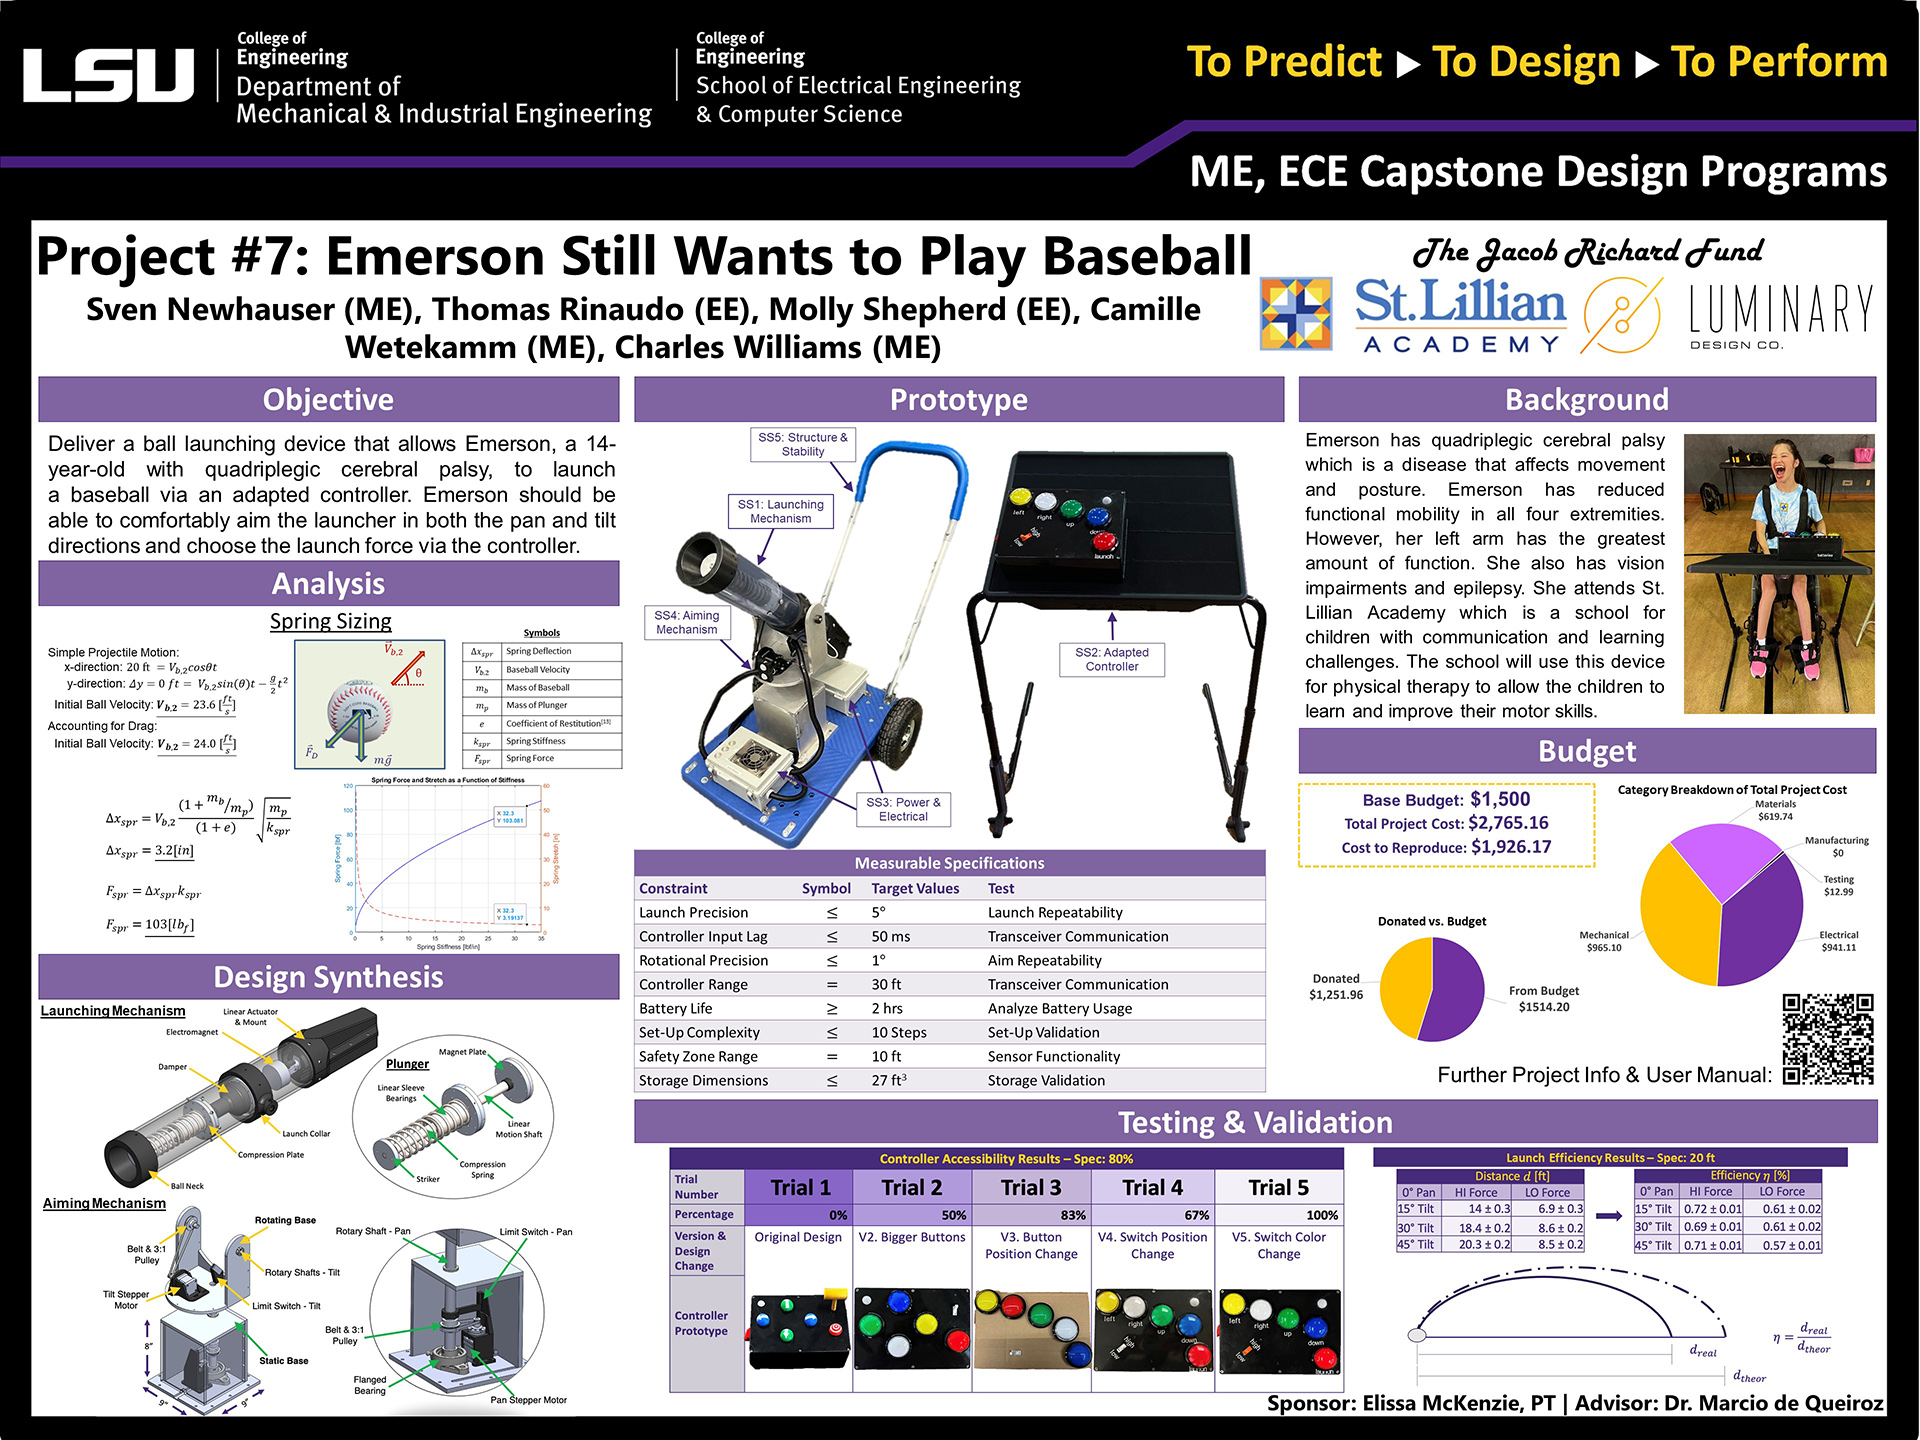 Project 7: Emerson still wants to play baseball (2022)